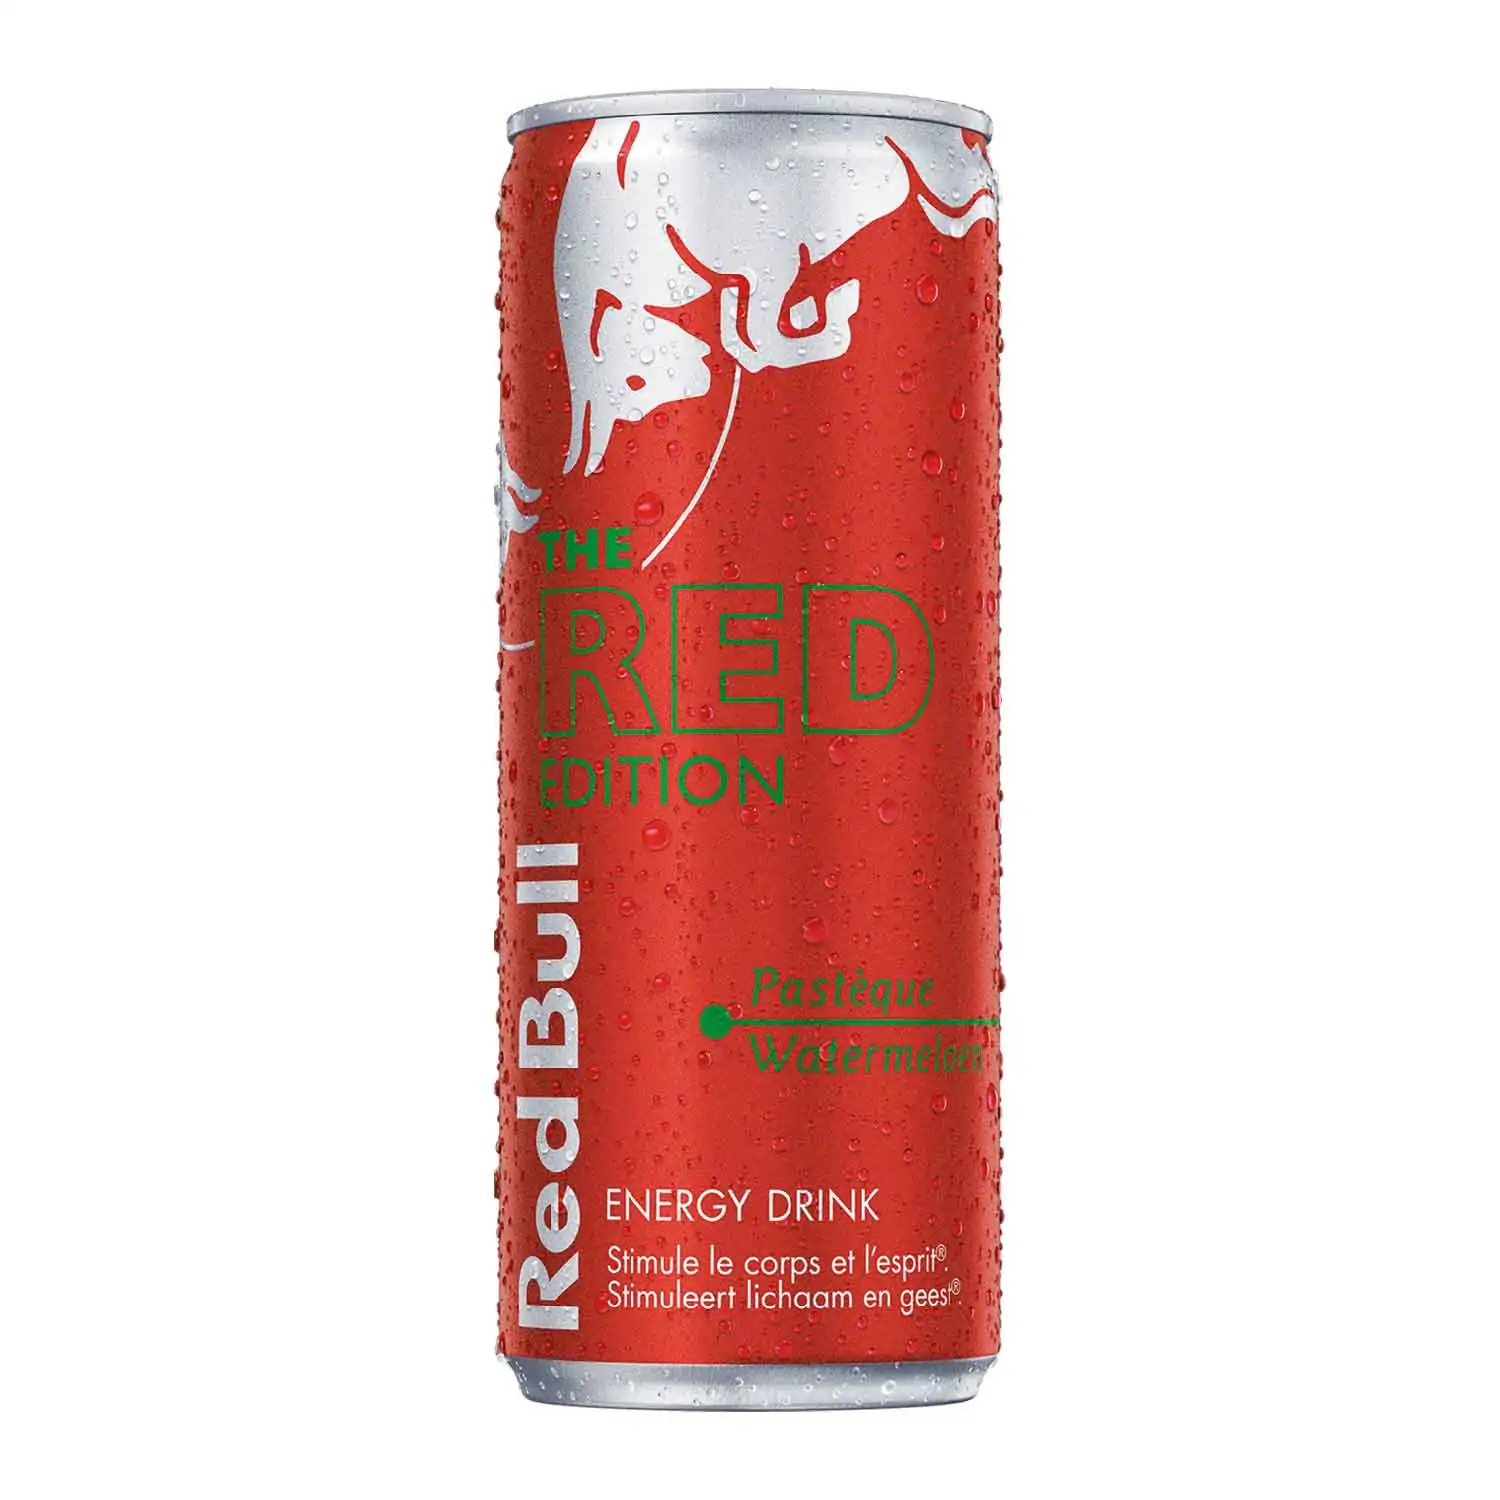 Red Bull red edition pastèque 25cl - Buy at Real Tobacco